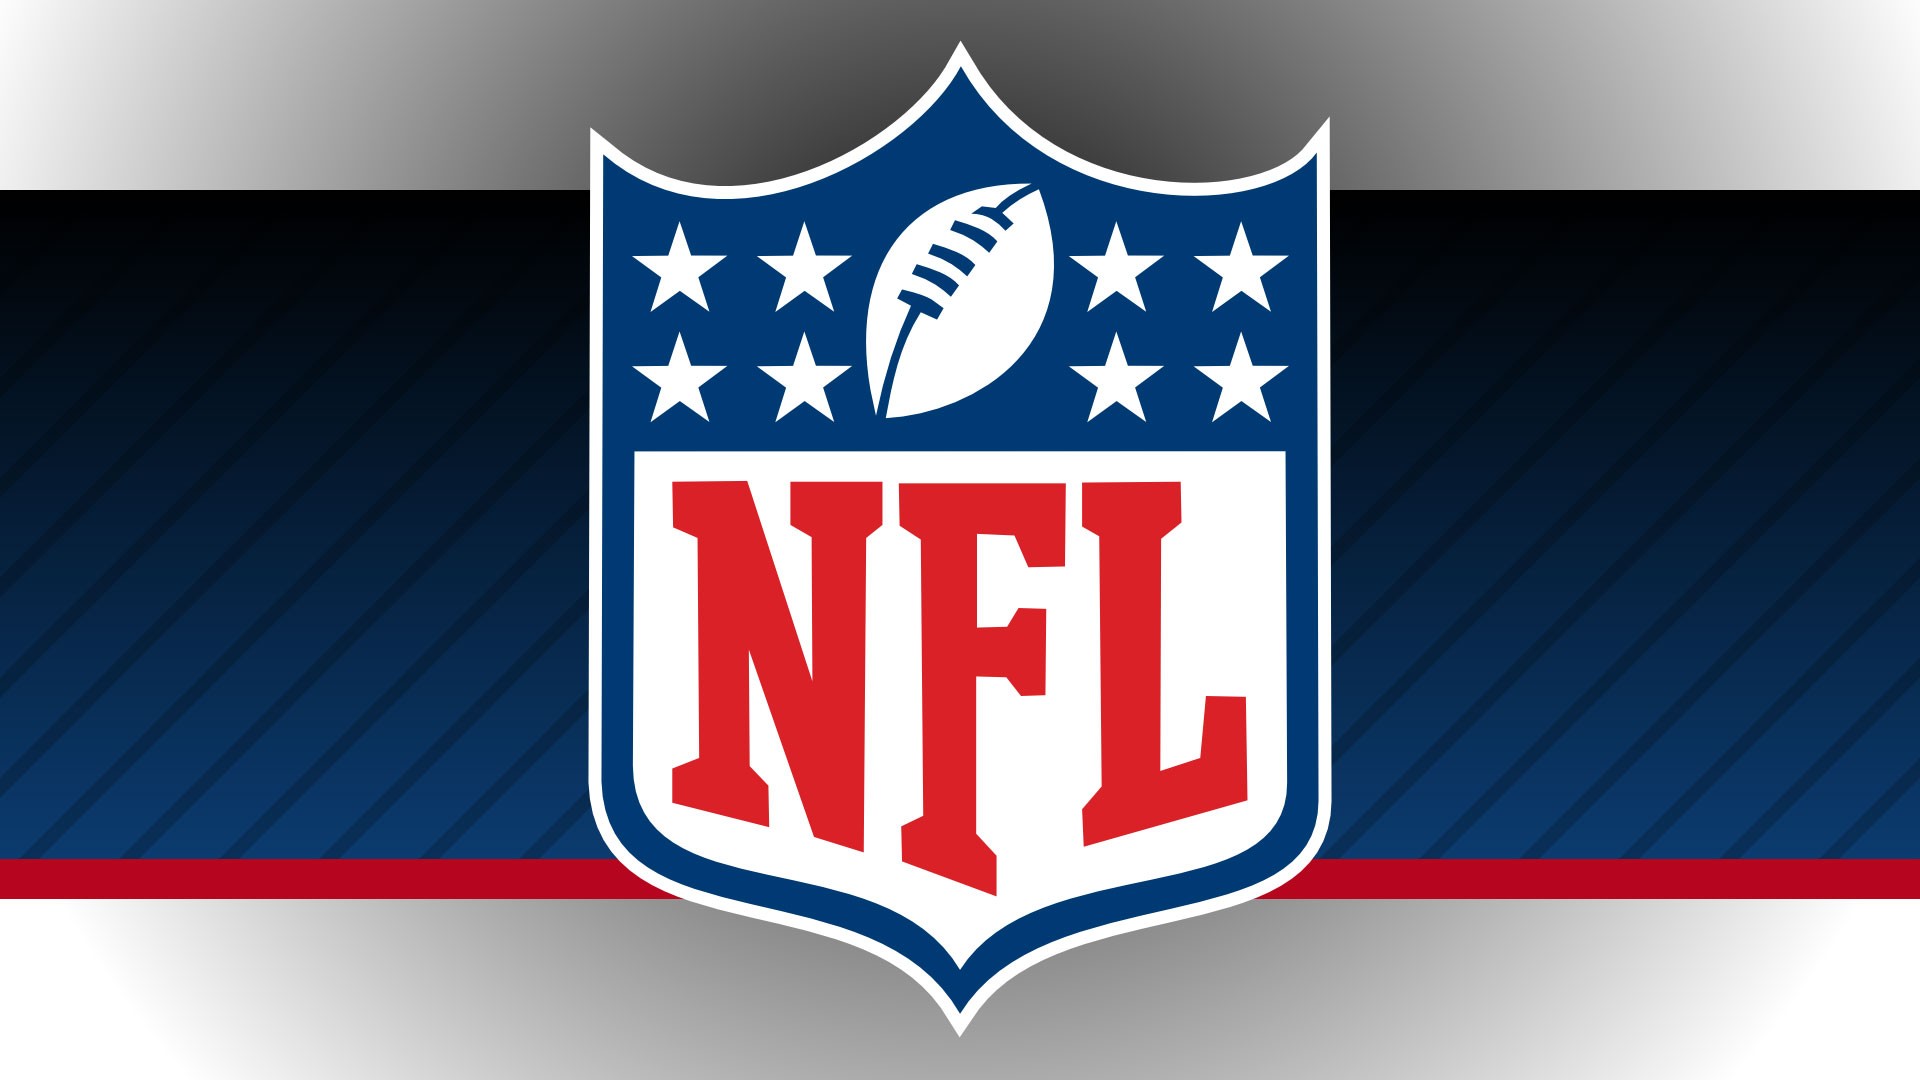 Wallpapers HD NFL Logo with high-resolution 1920x1080 pixel. You can use this wallpaper for your Mac or Windows Desktop Background, iPhone, Android or Tablet and another Smartphone device